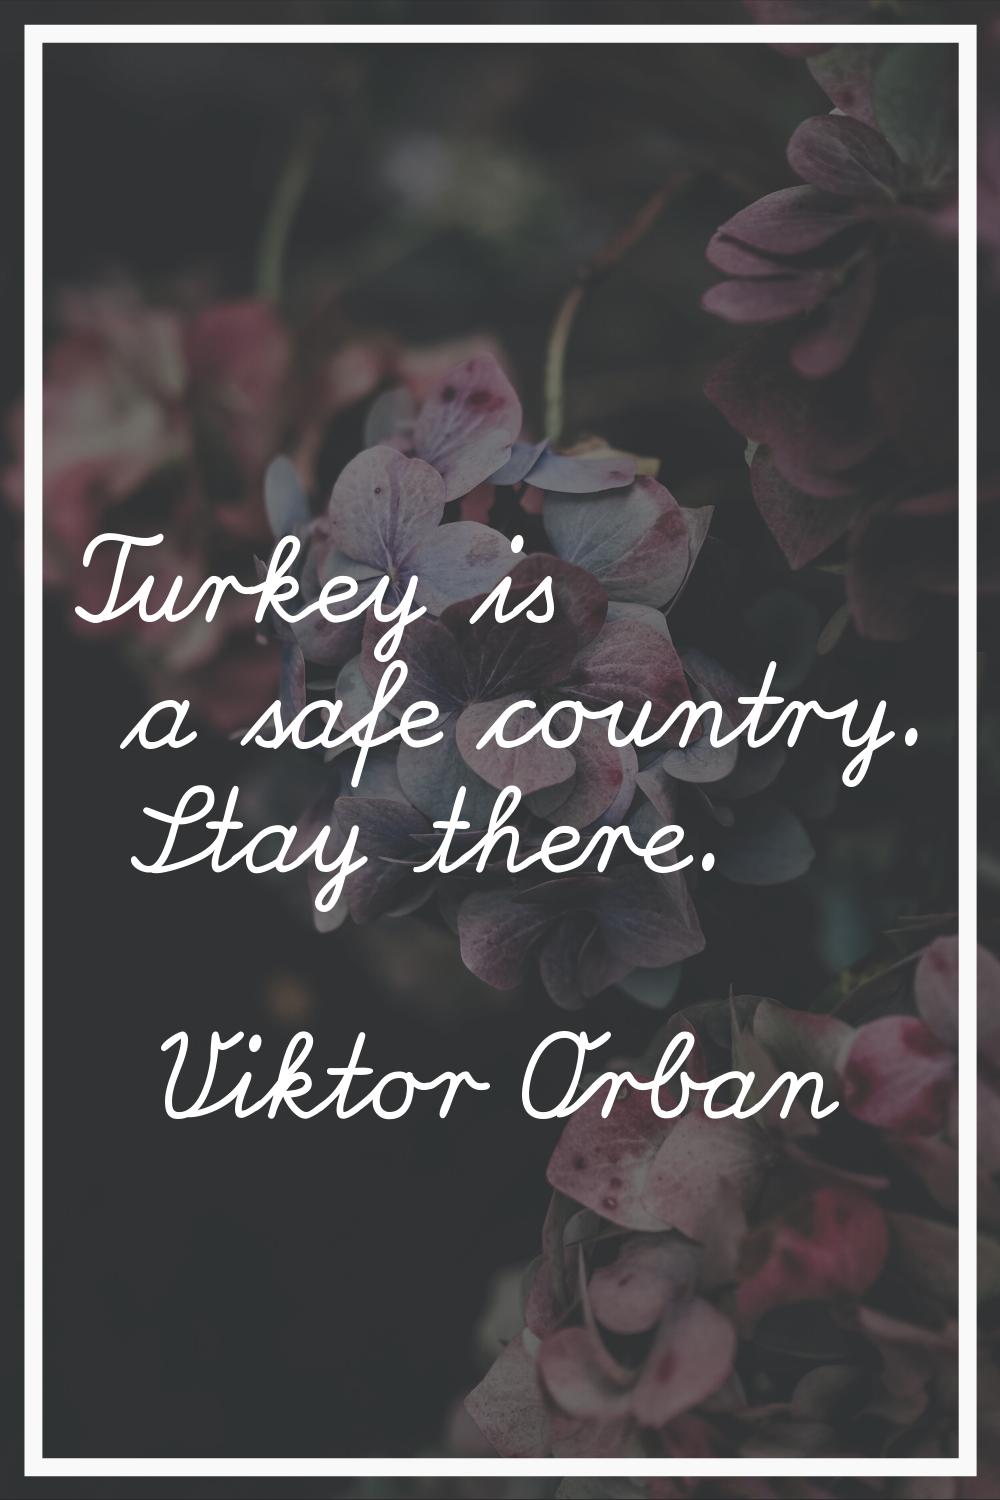 Turkey is a safe country. Stay there.